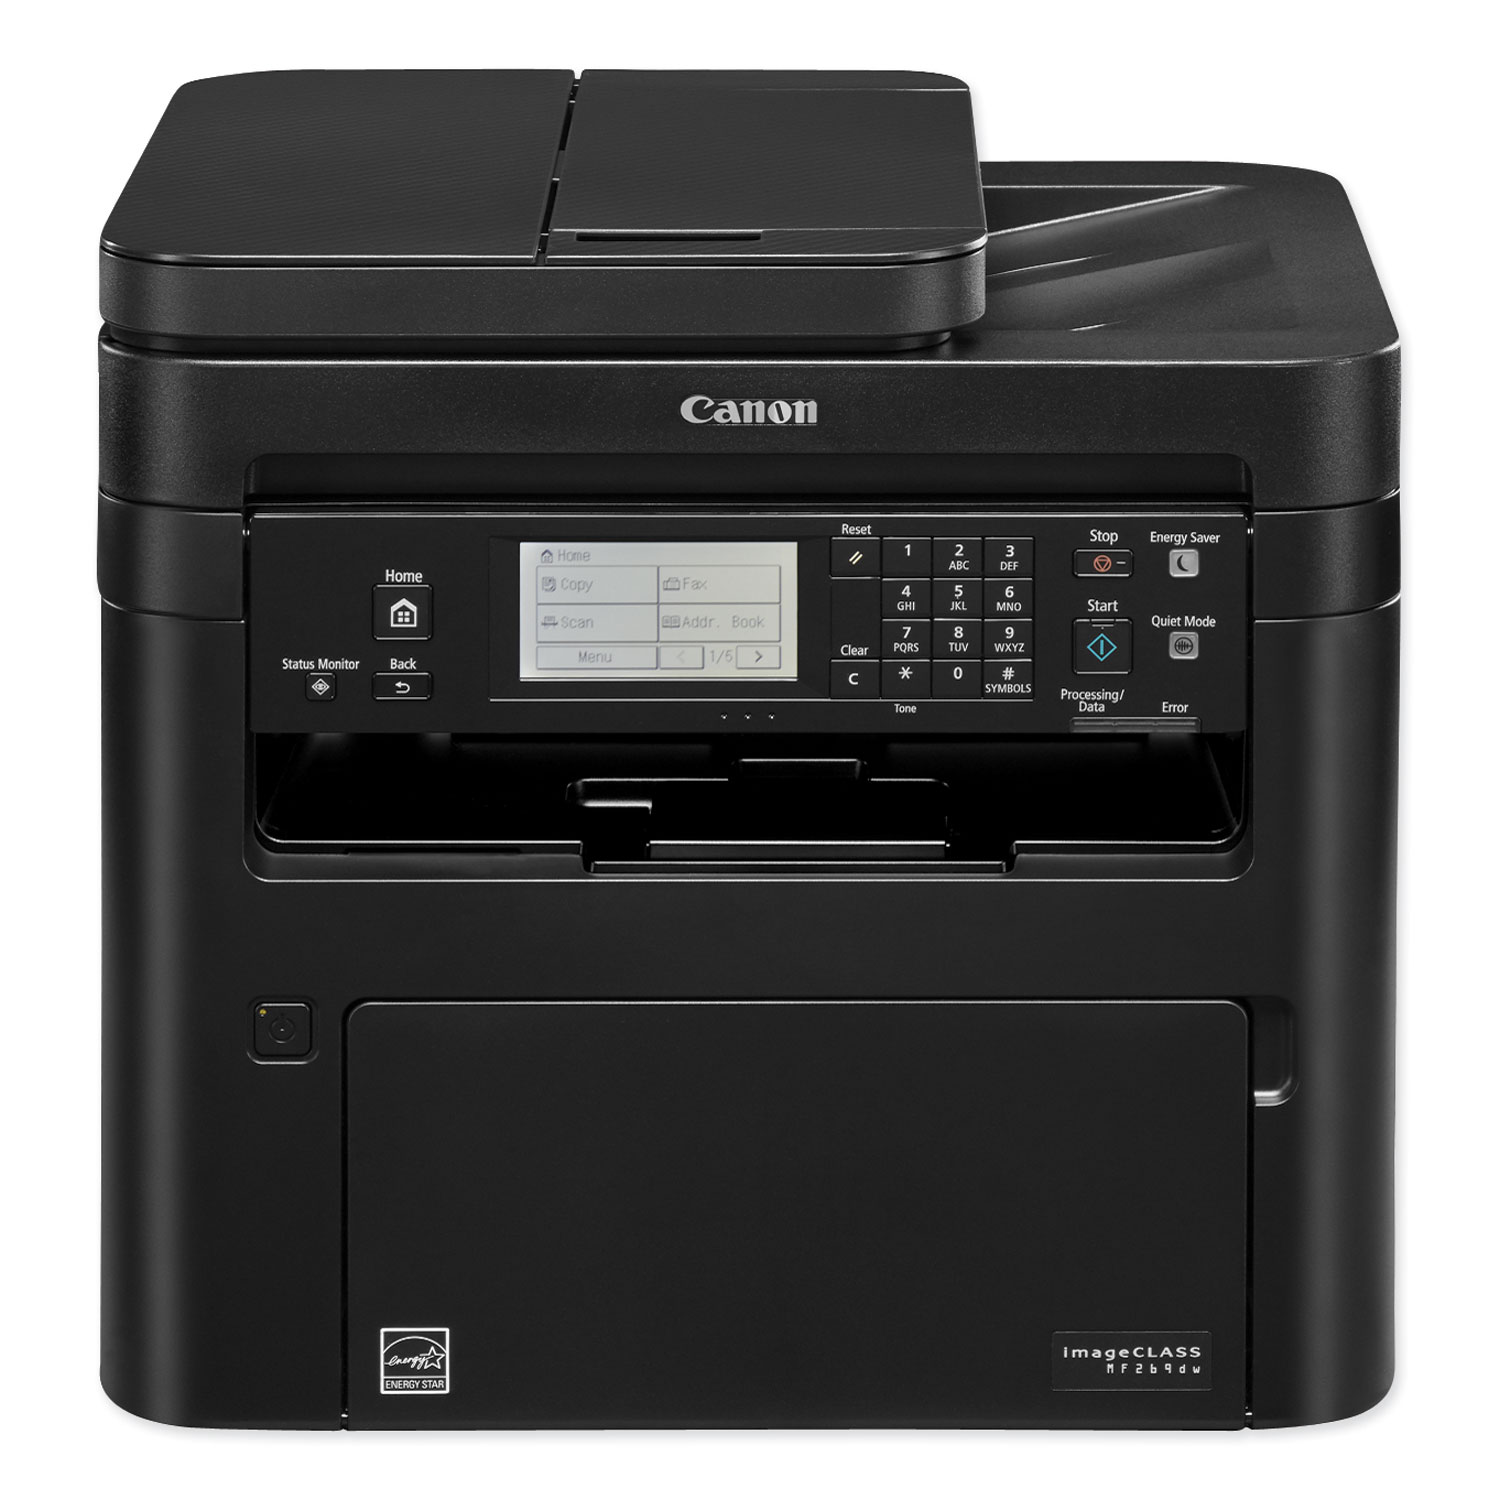  Canon 2925C059 ImageCLASS MF269dw Wireless All-in-One Laser Printer Value Pack, Copy/Fax/Print/Scan (CNM2925C059) 